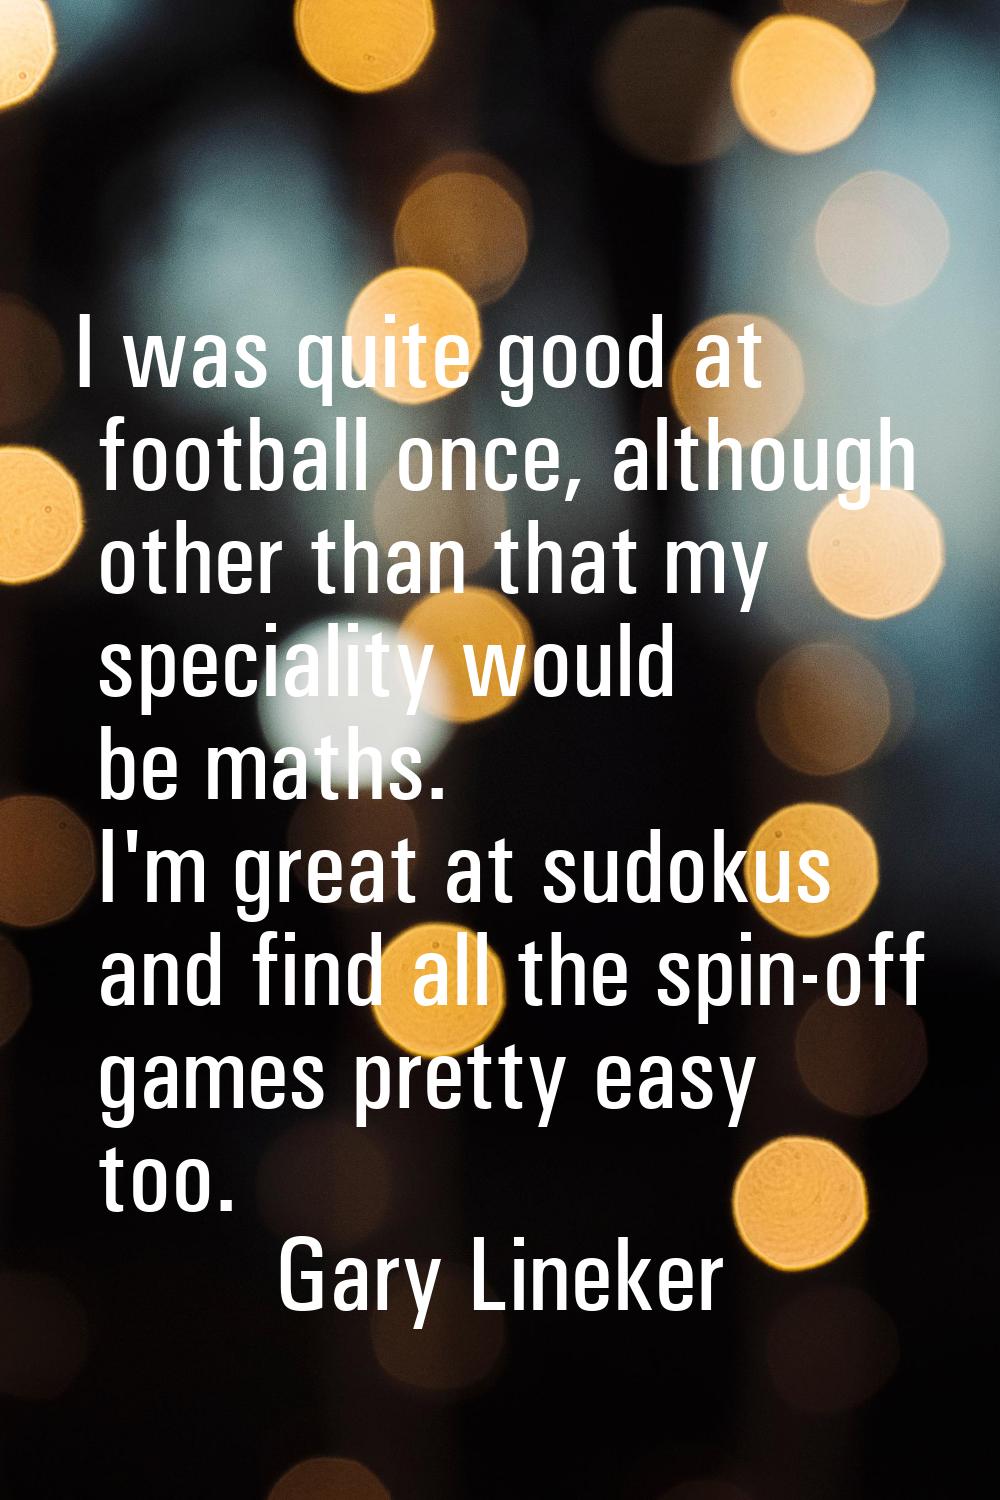 I was quite good at football once, although other than that my speciality would be maths. I'm great